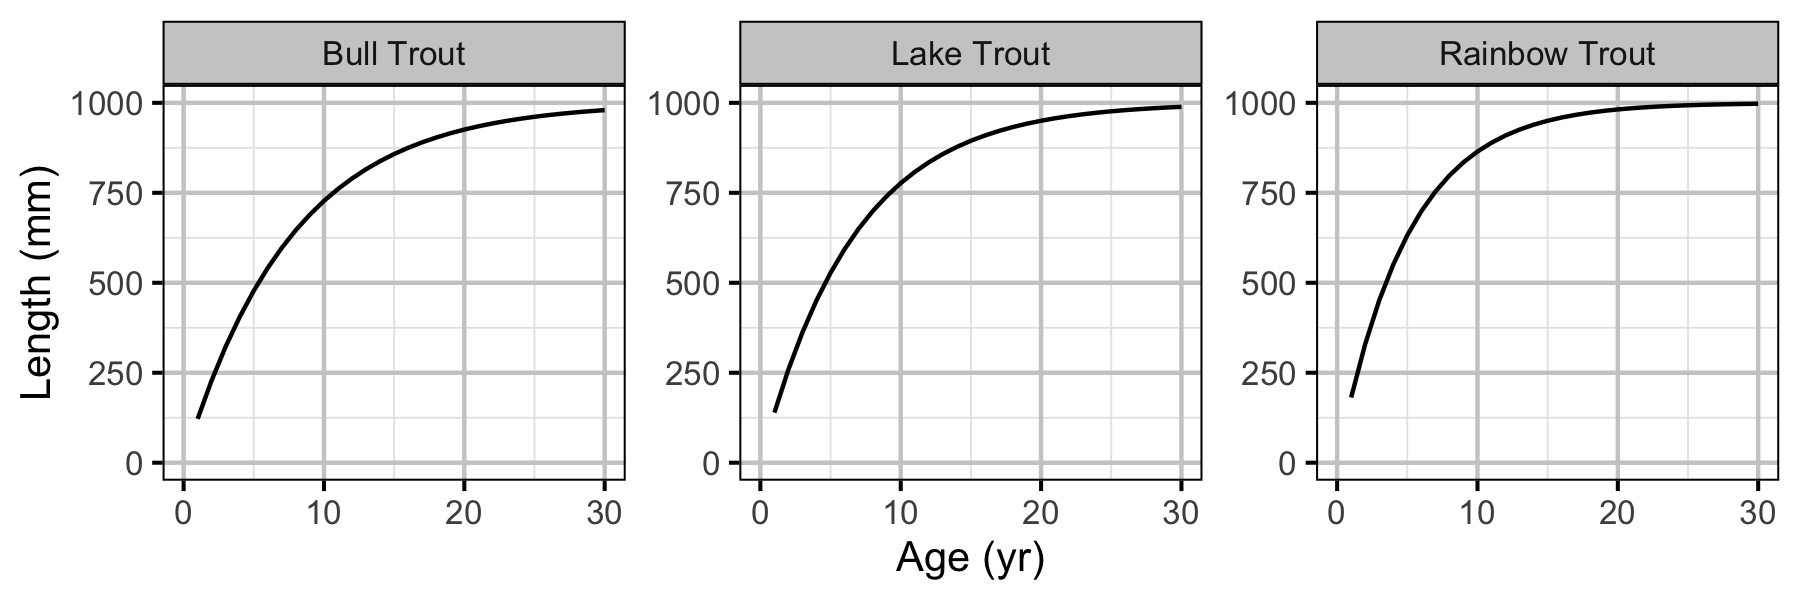 figures/yield/slot/length_age.png